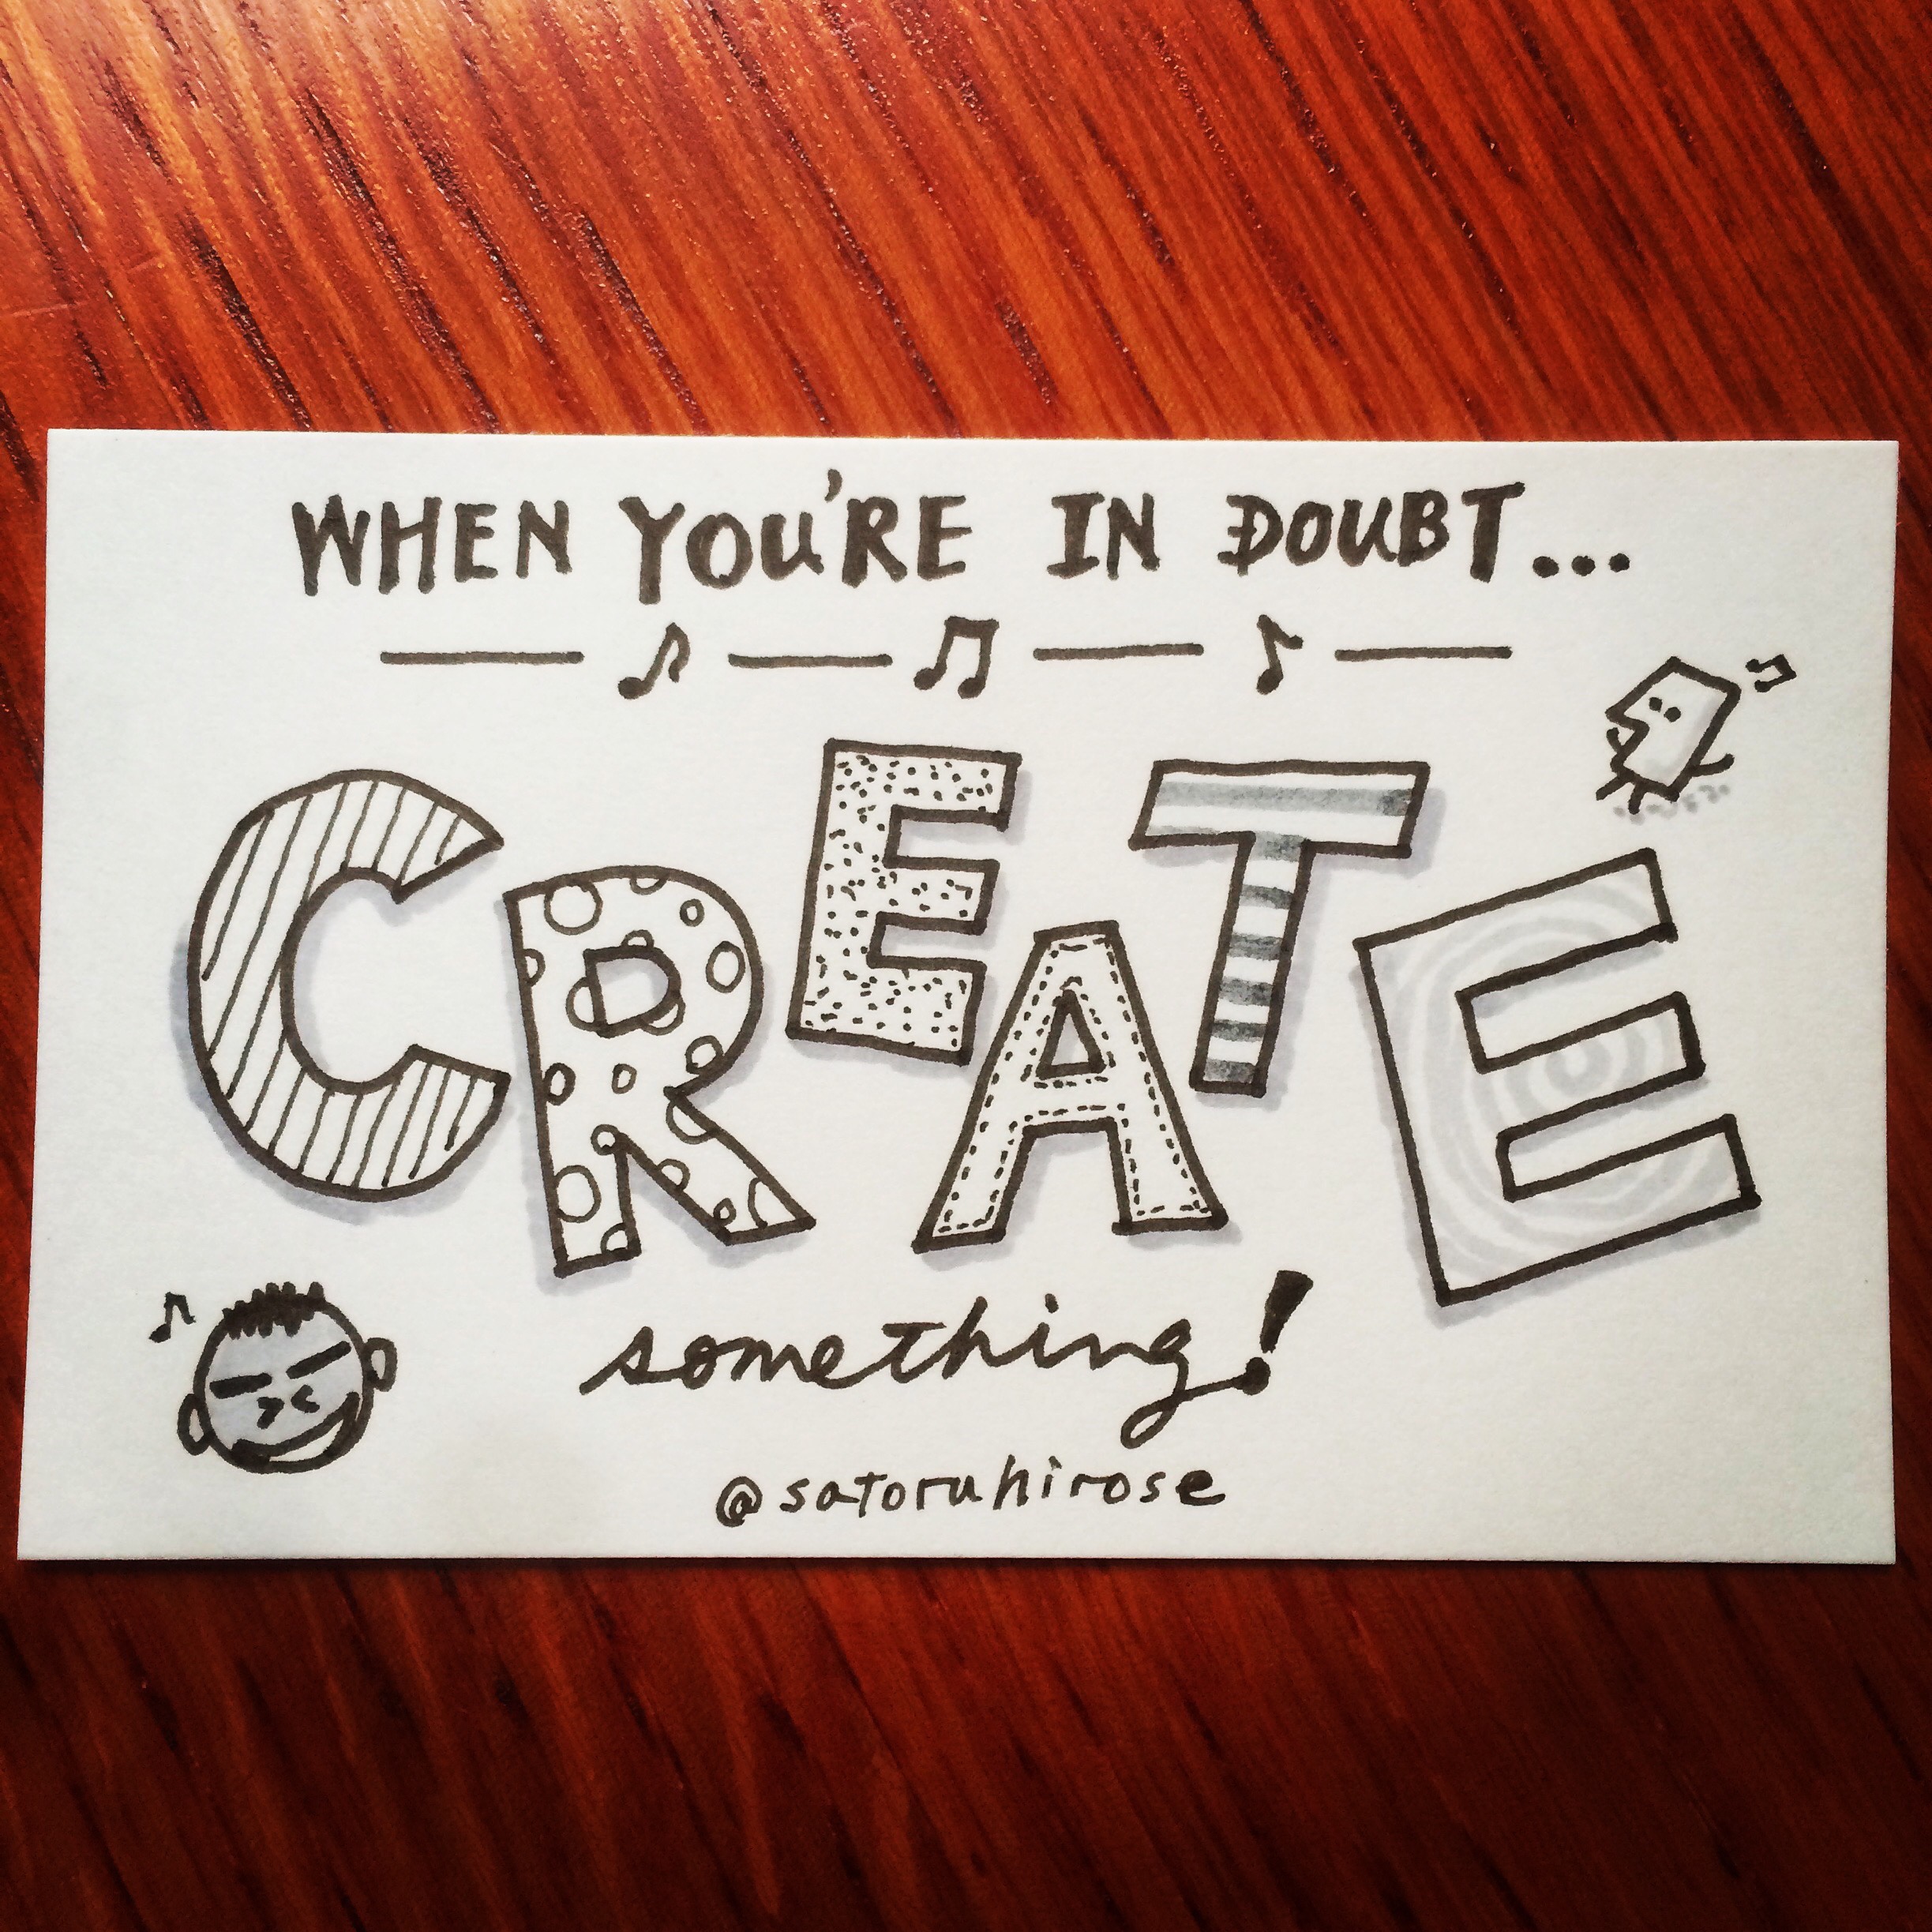 When you're in doubt, create something.